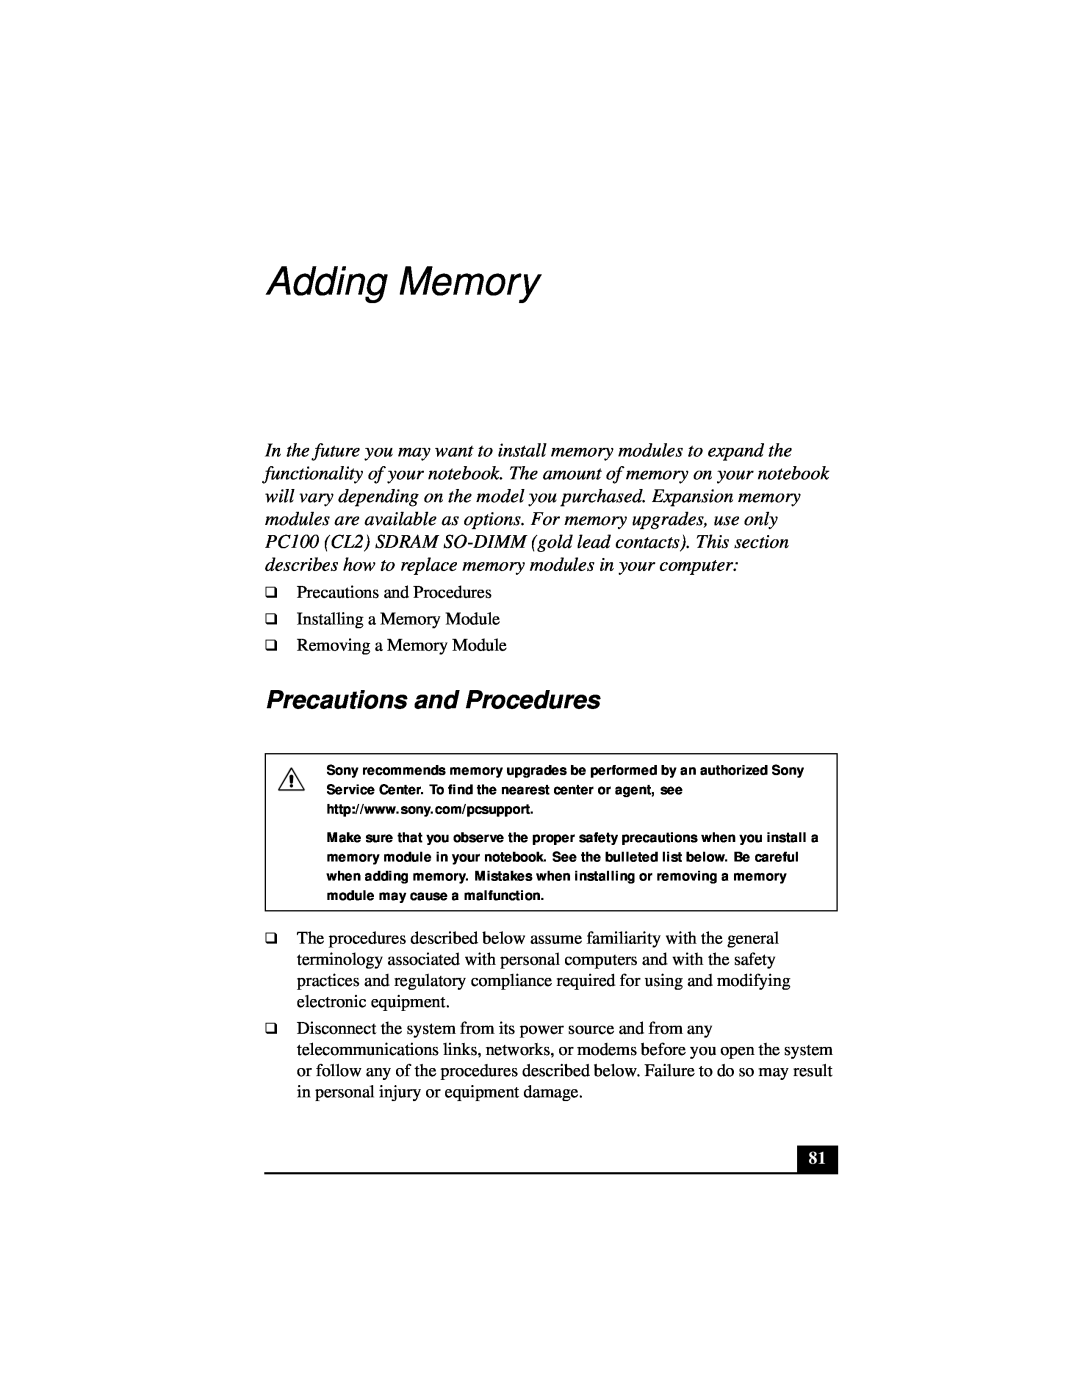 Sony Notebook Computer manual Adding Memory, Precautions and Procedures 